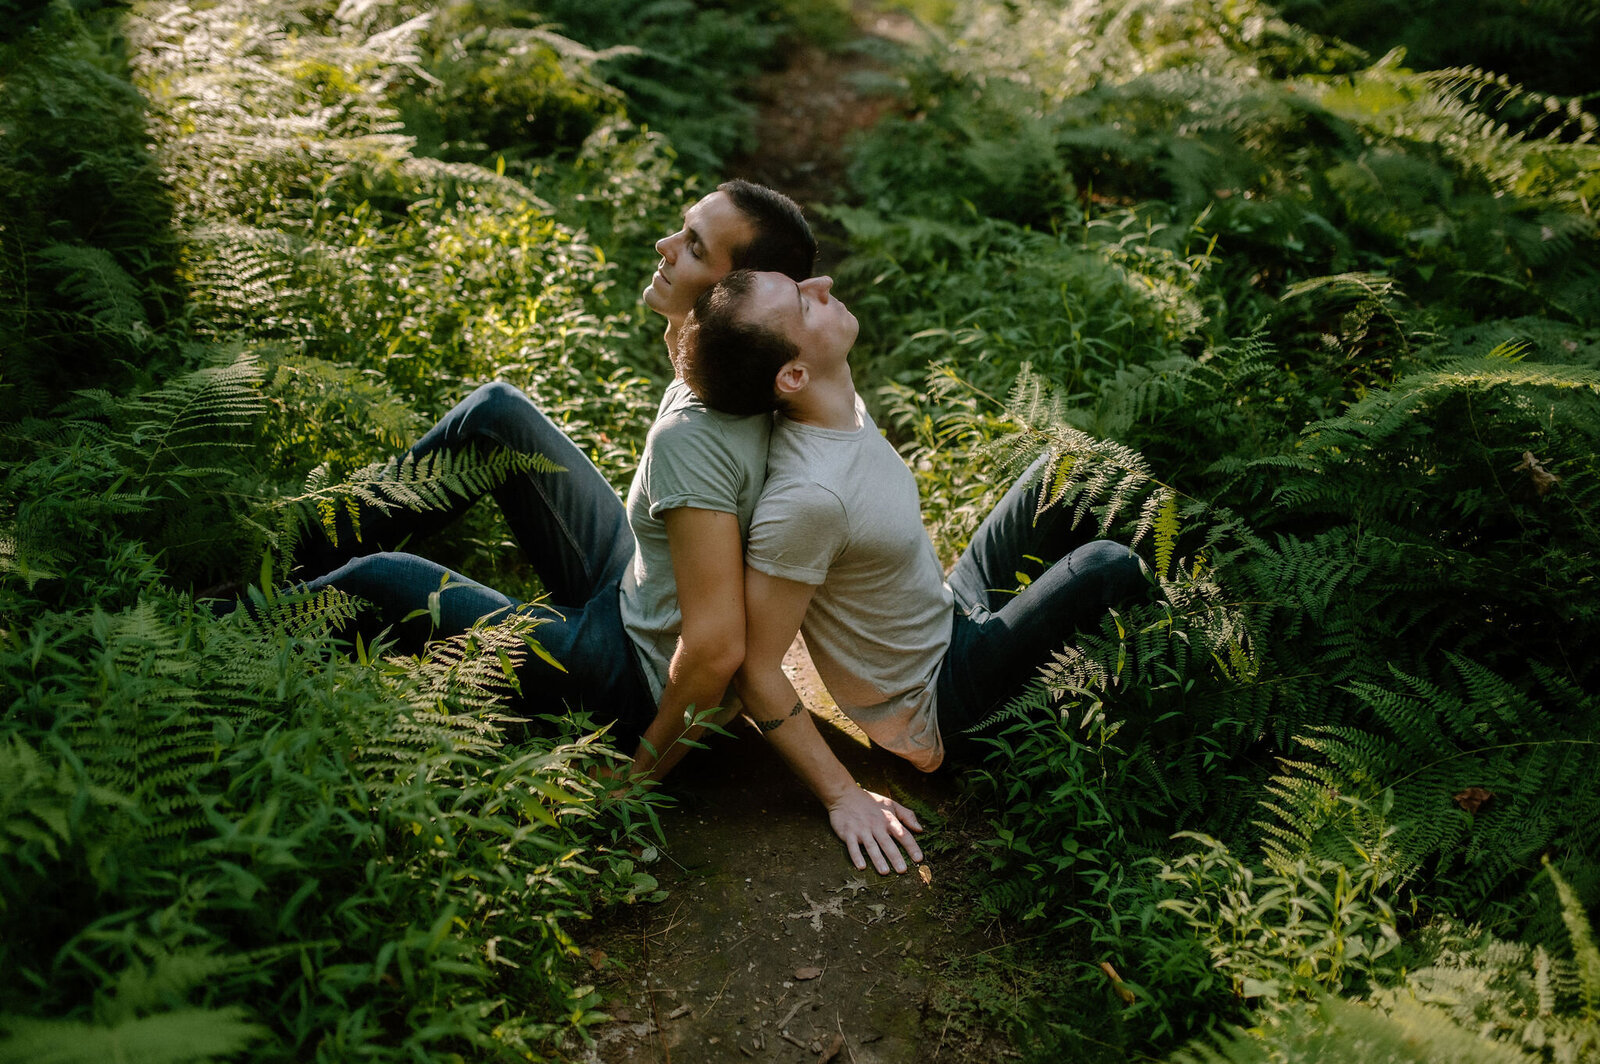 couple sitting in lush green enchanted forest back to back peaceful moment